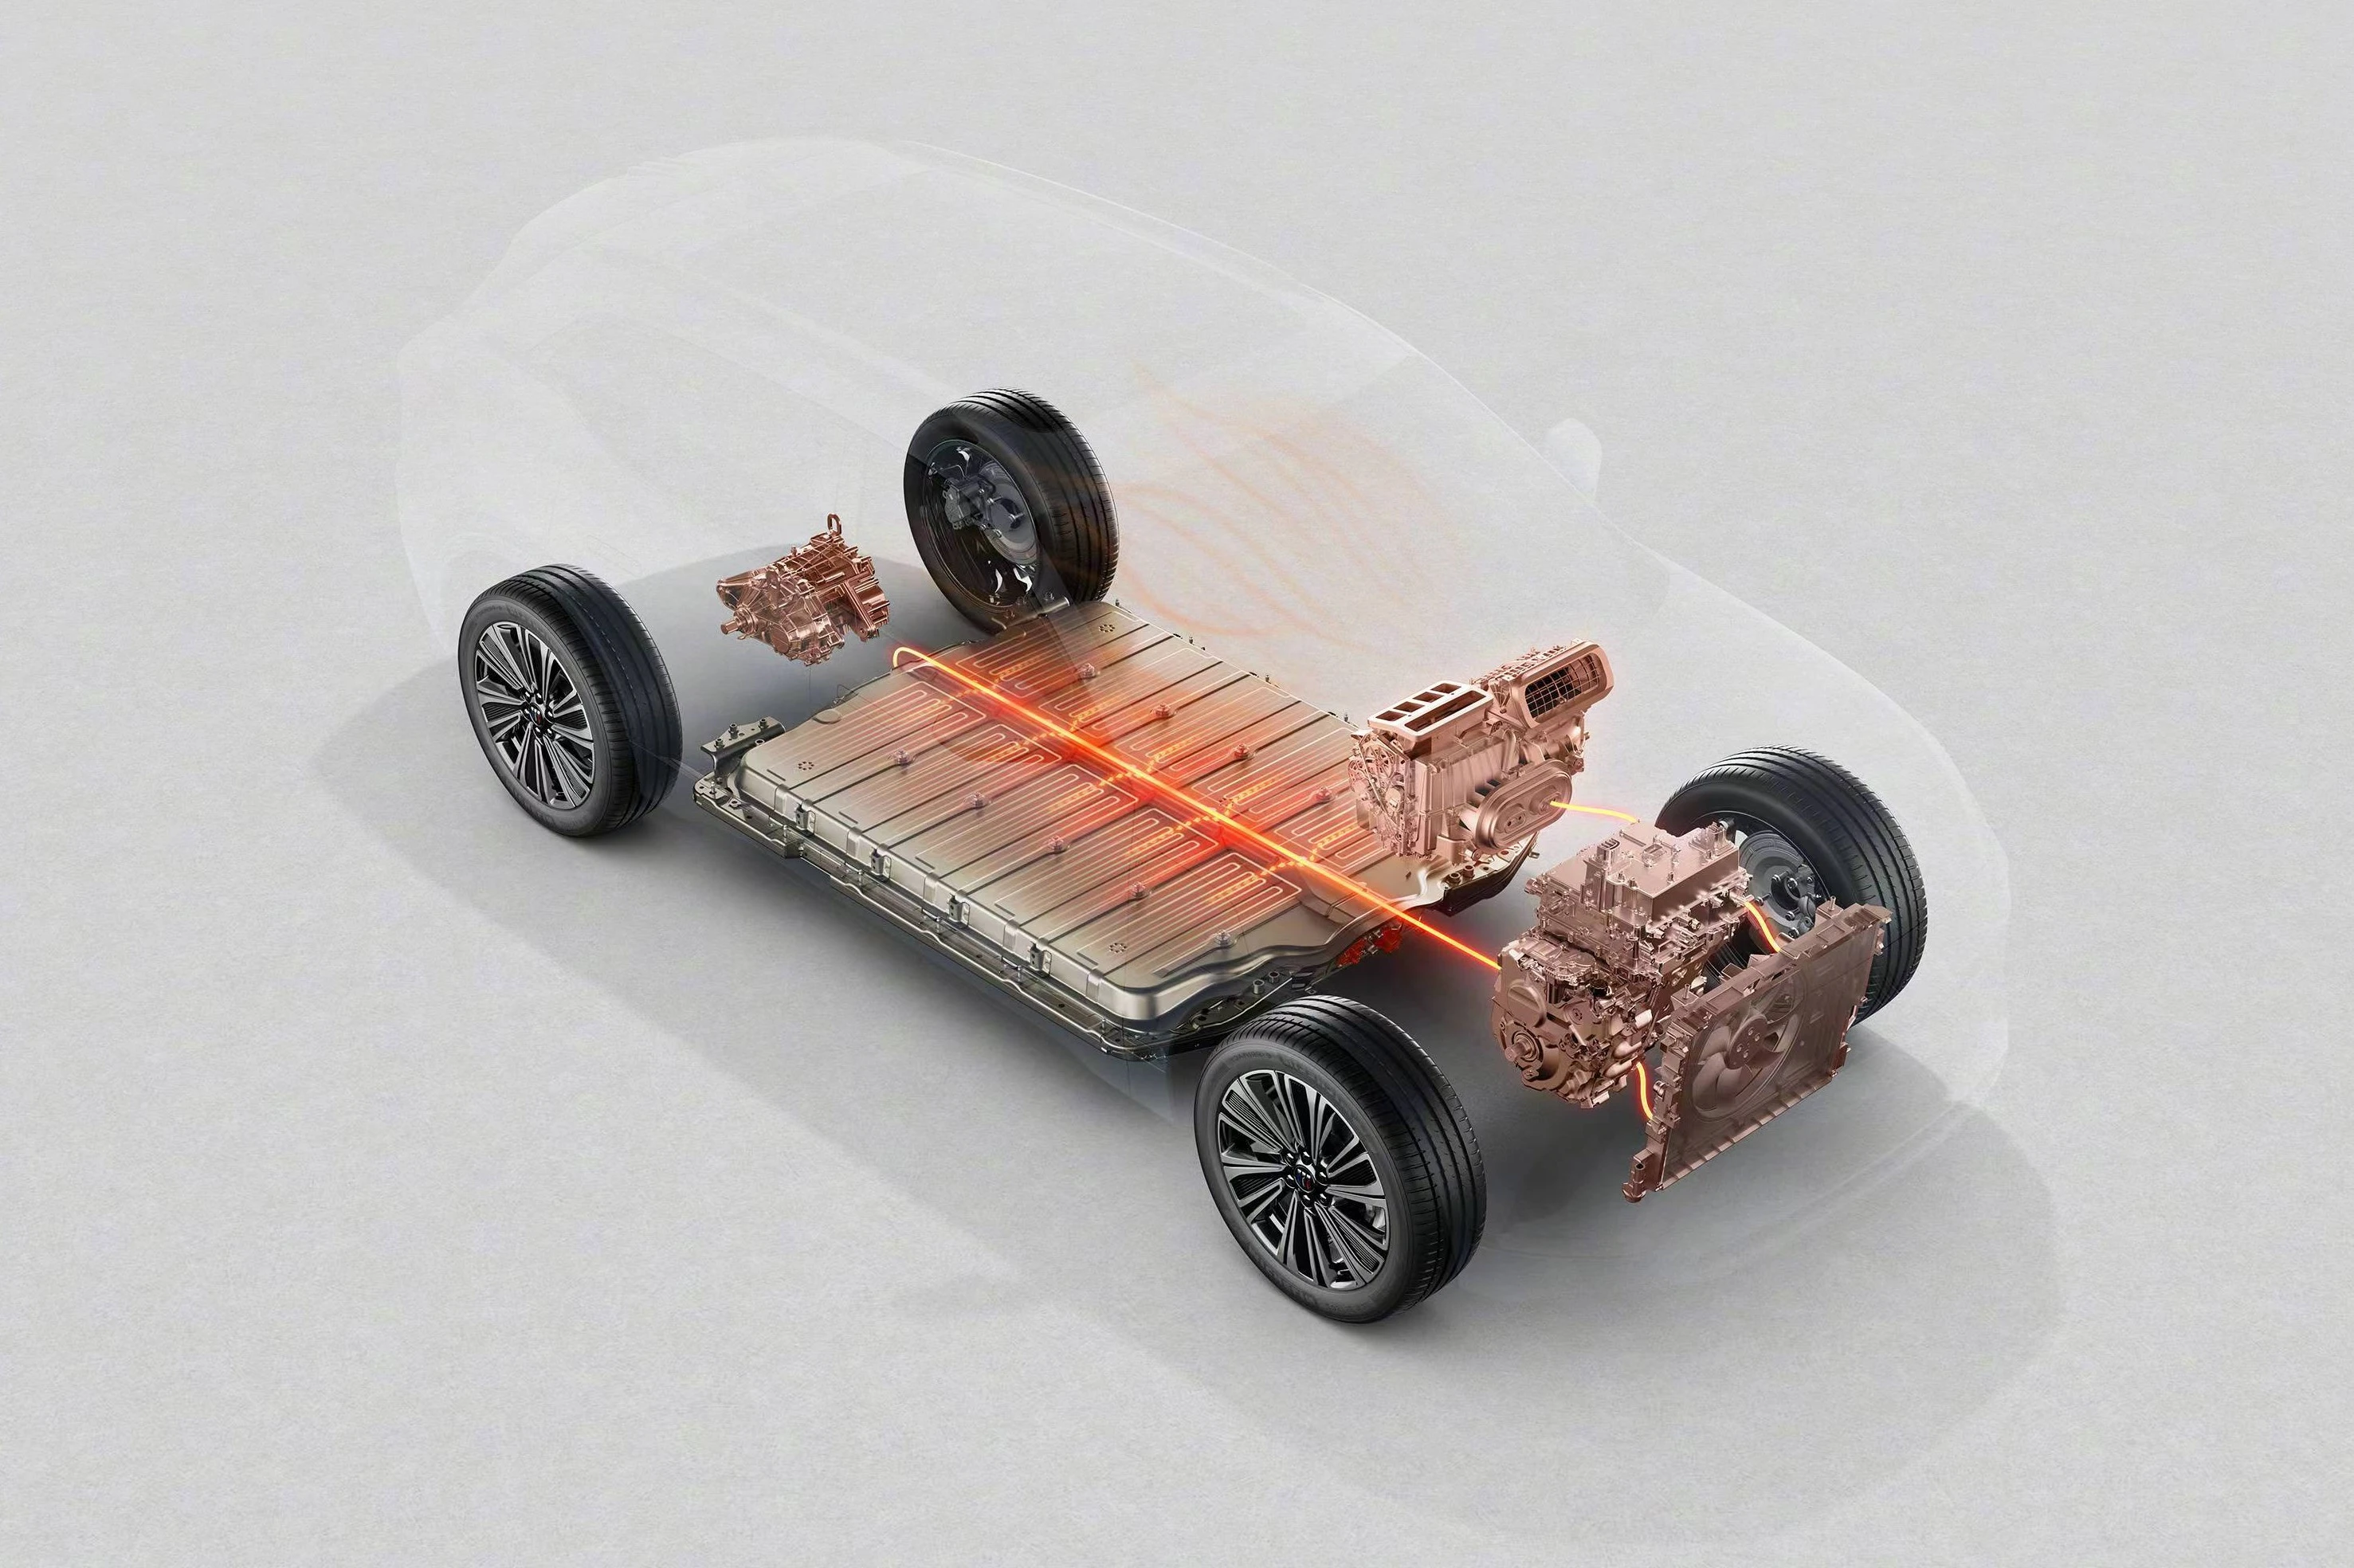 Battery case lightweighting is a key area for new energy vehicles